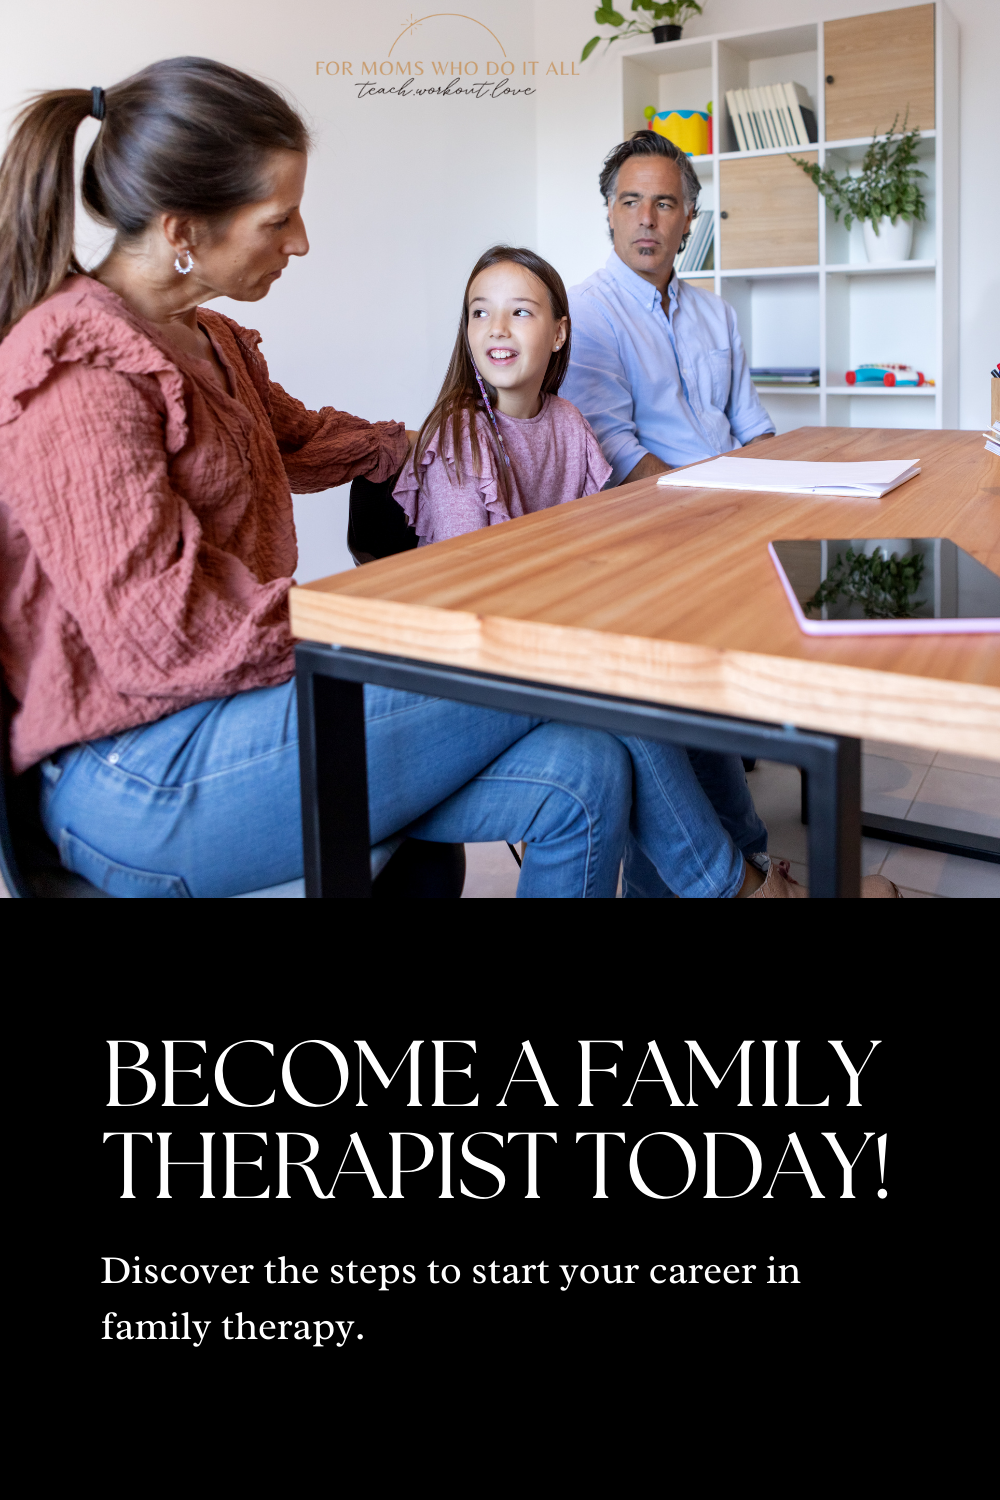 How to Become Family Therapist - Step By Step Guide - Teachworkoutlove